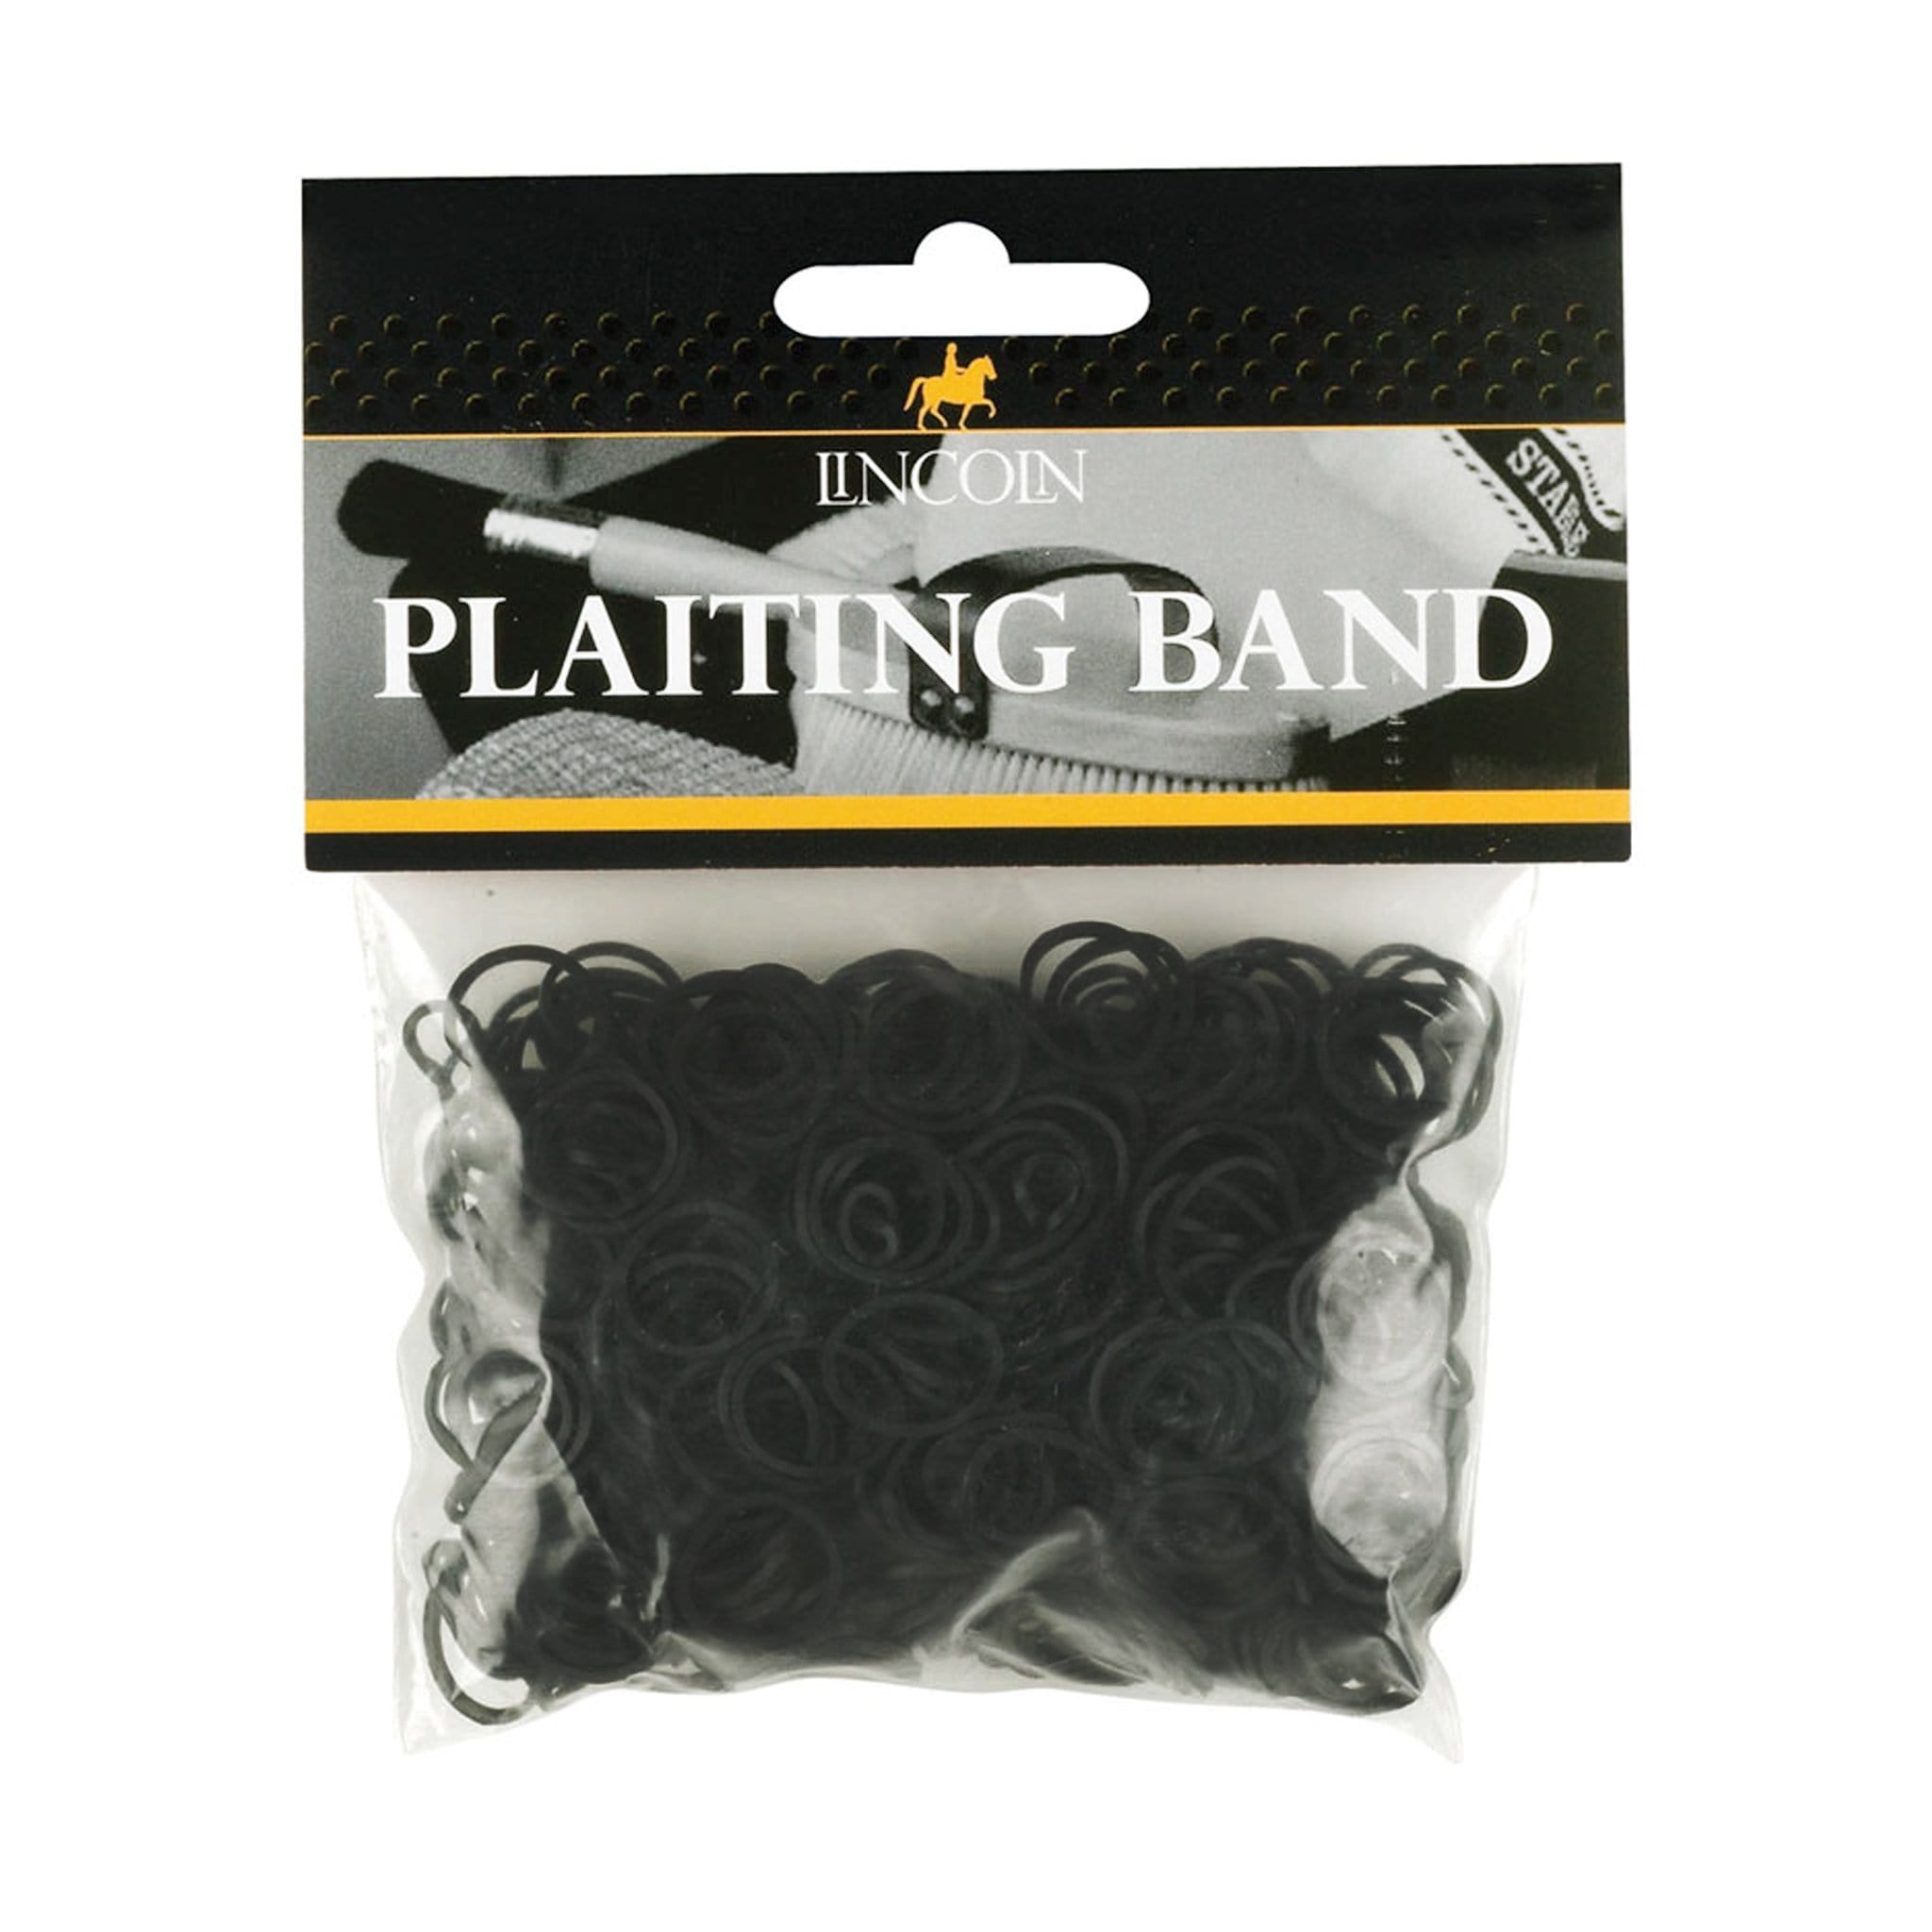 Lincoln Plaiting Bands 4032